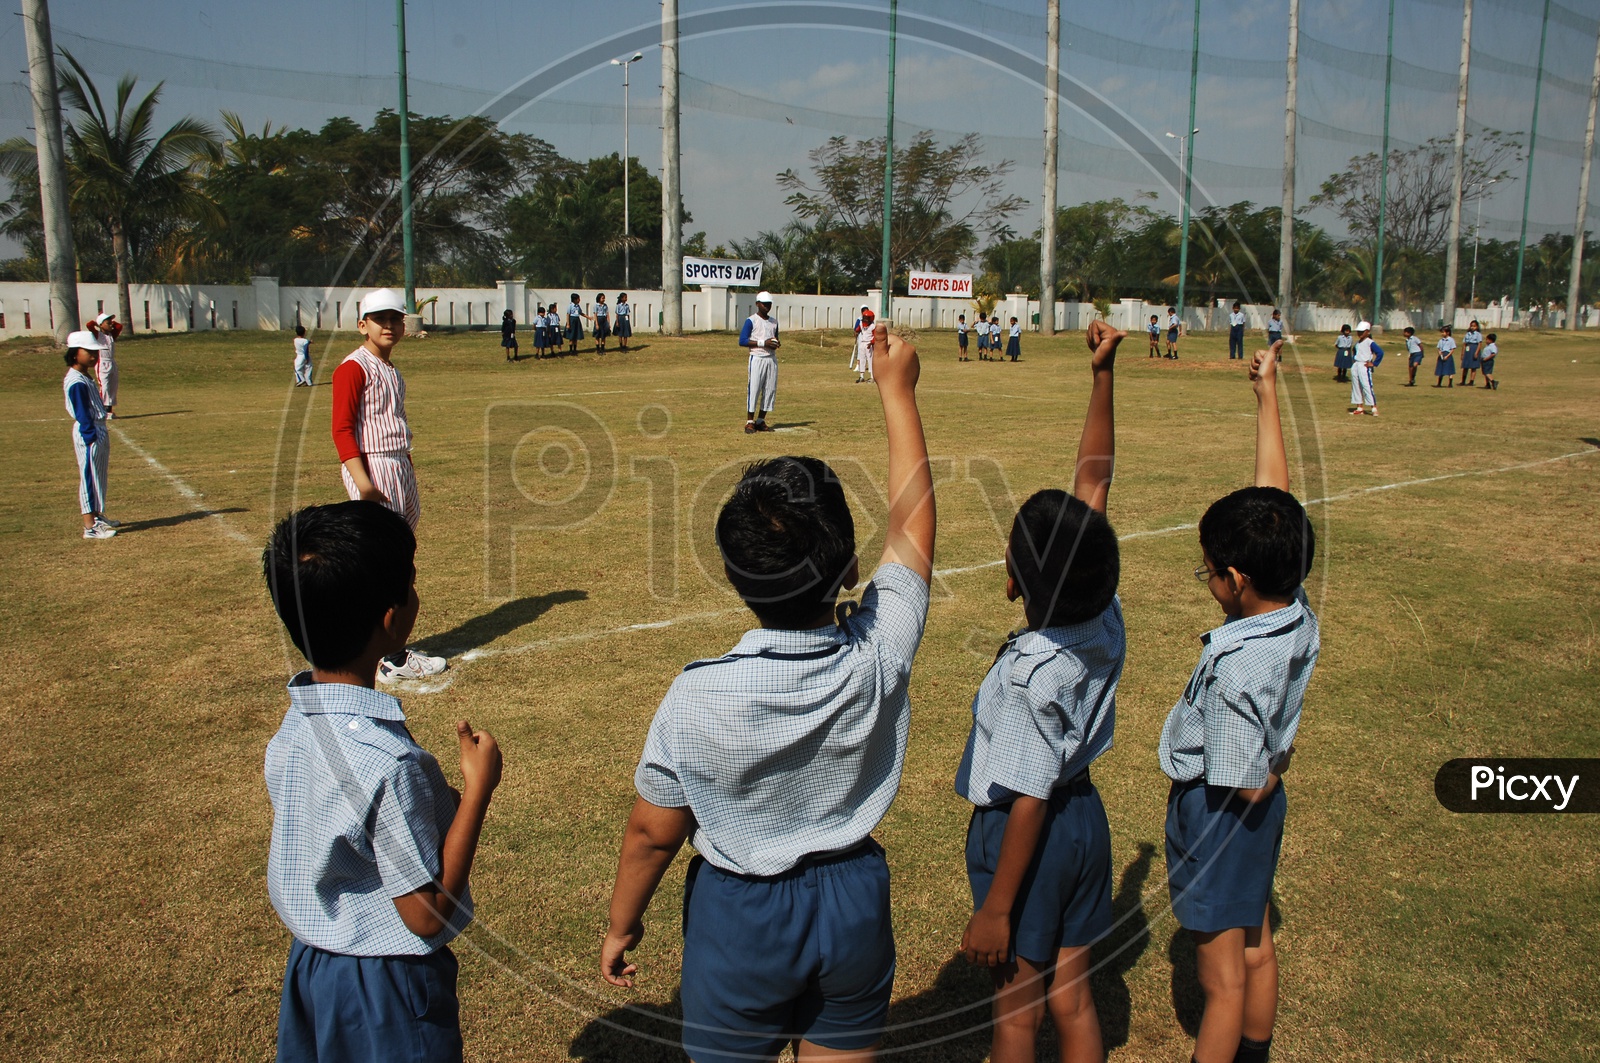 Children cheering other kids at the School Sport day